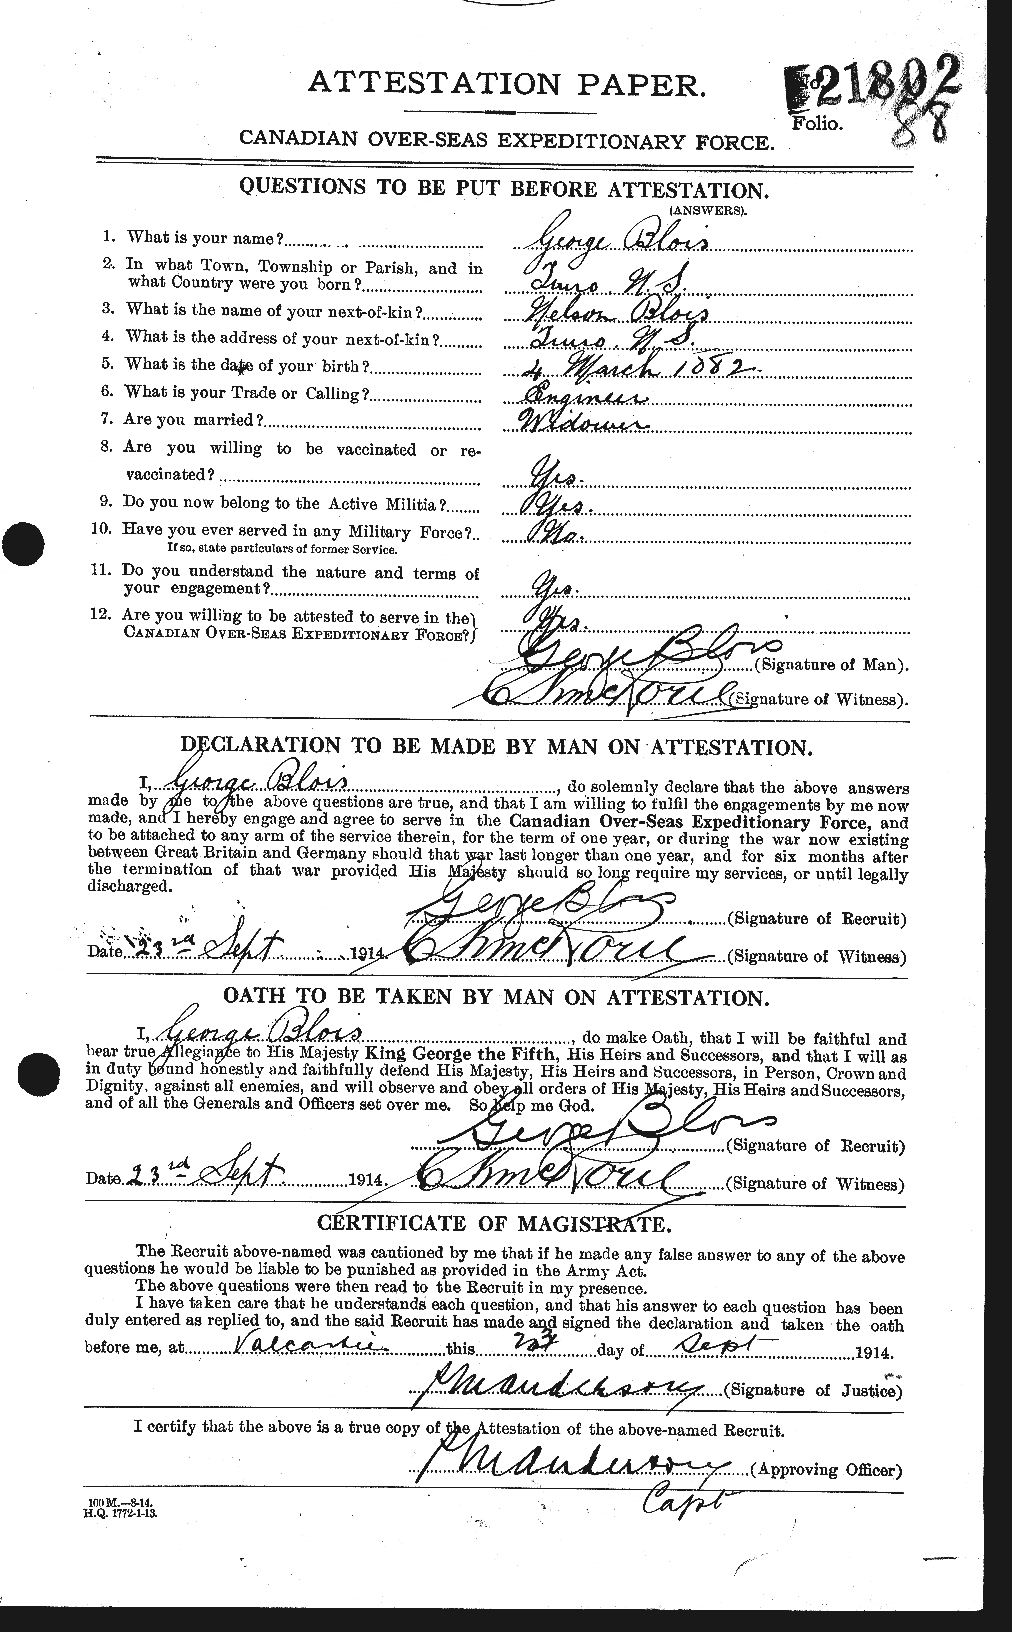 Personnel Records of the First World War - CEF 248449a